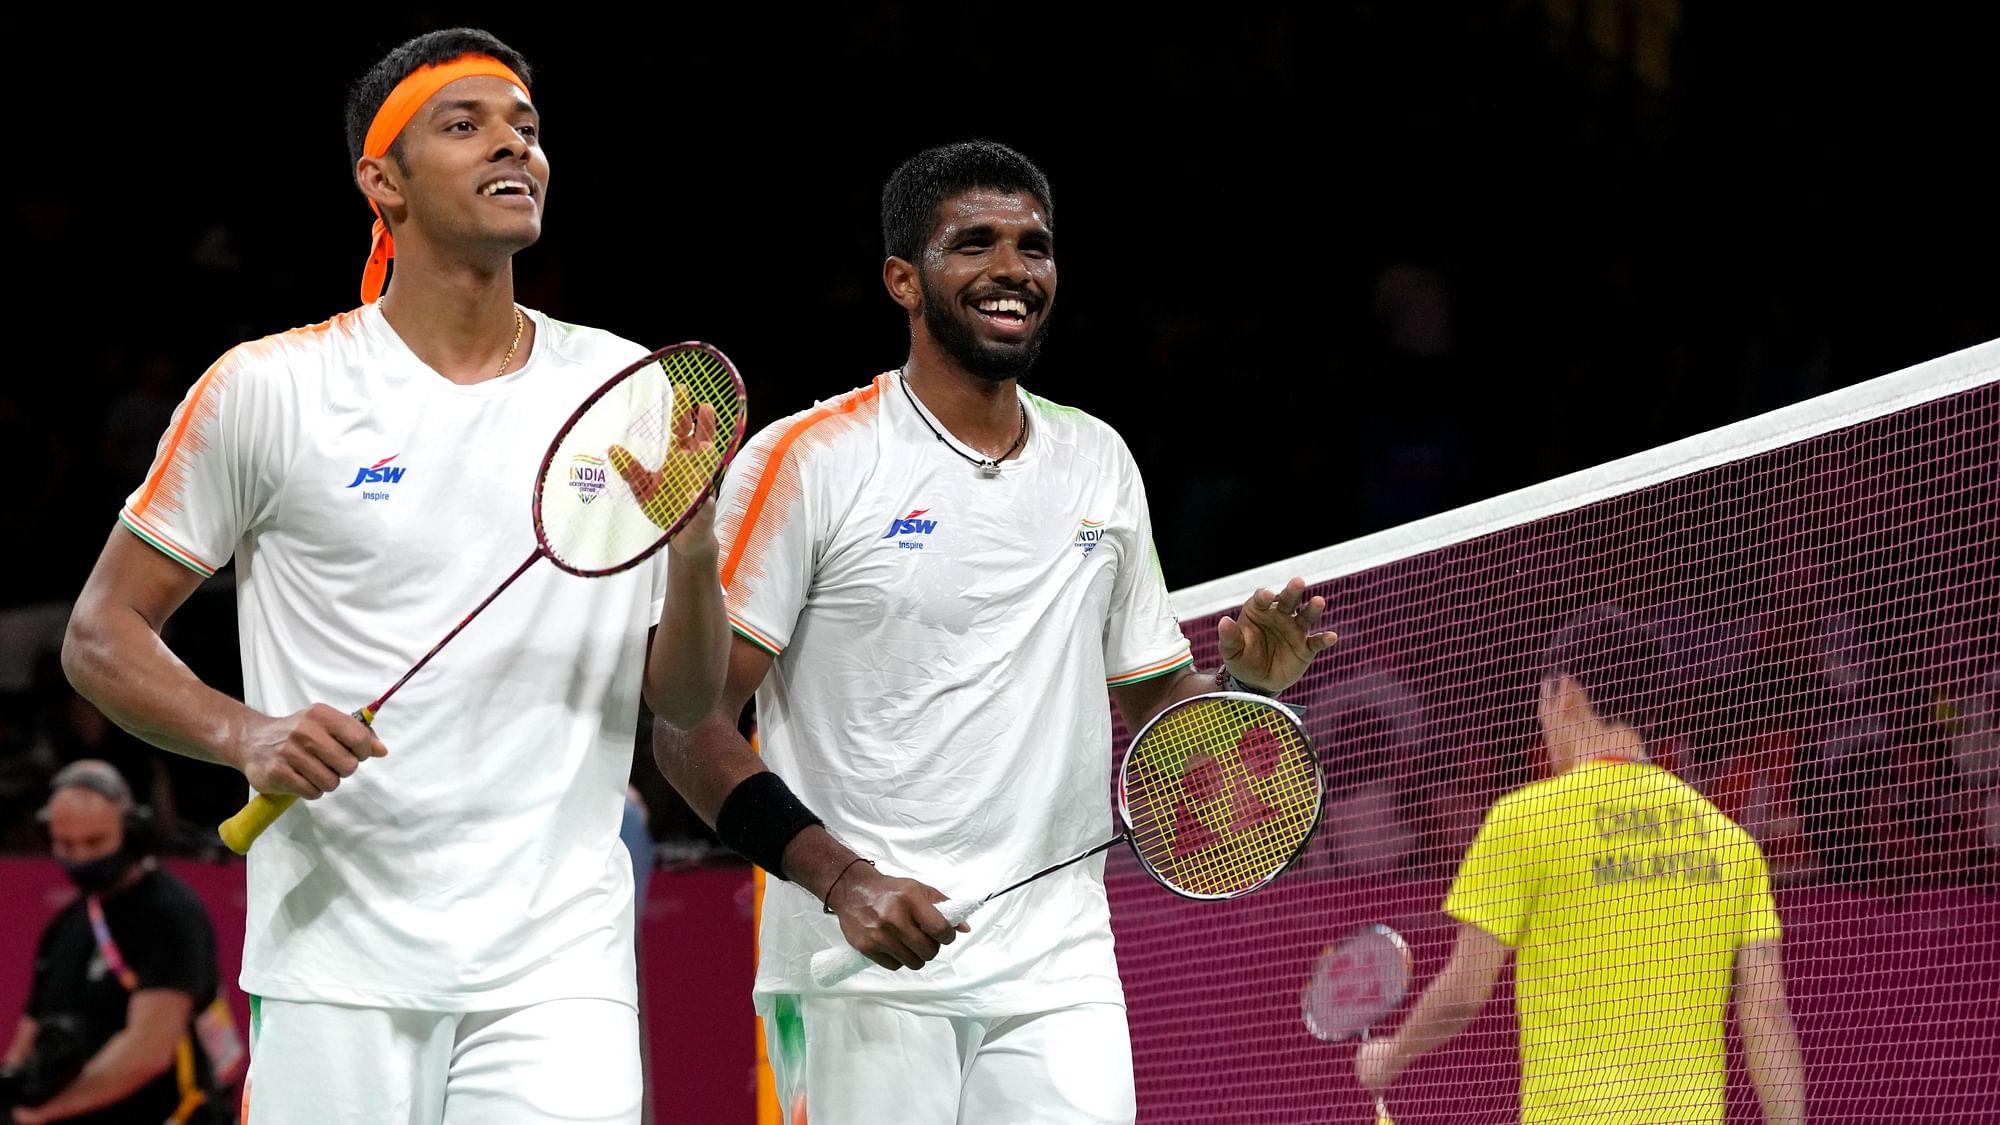 Satwik-Chirag Rise to Career-Best World No 3 in BWF Doubles Rankings